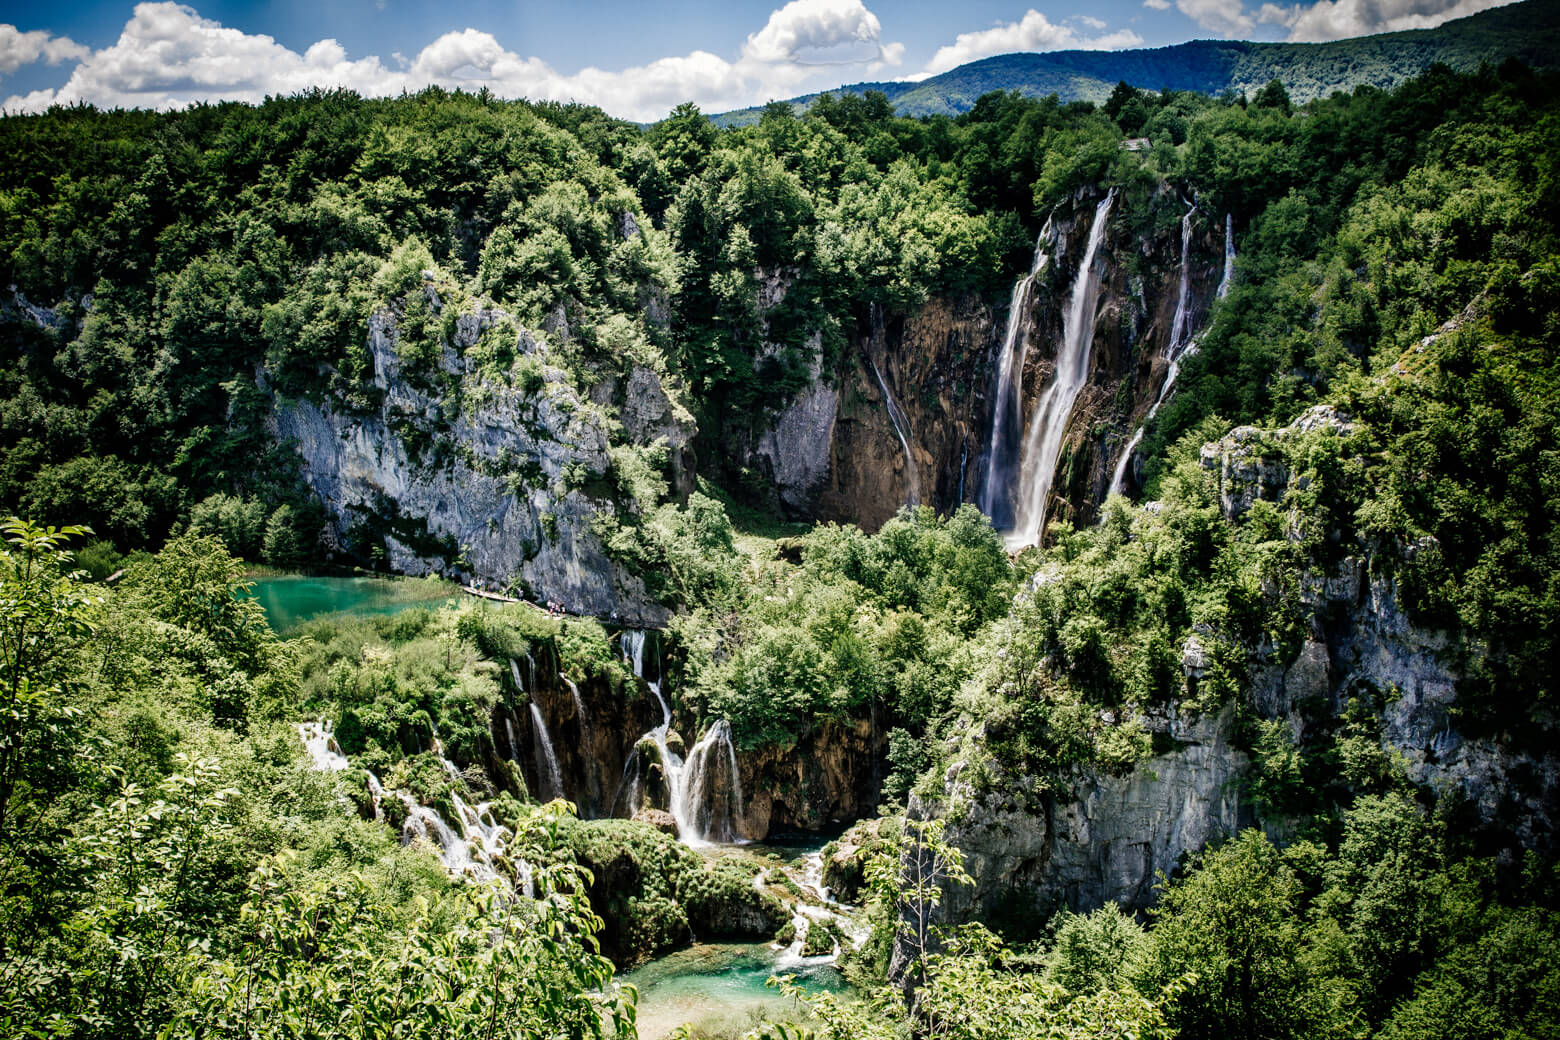 Visiting Plitvice in Summer